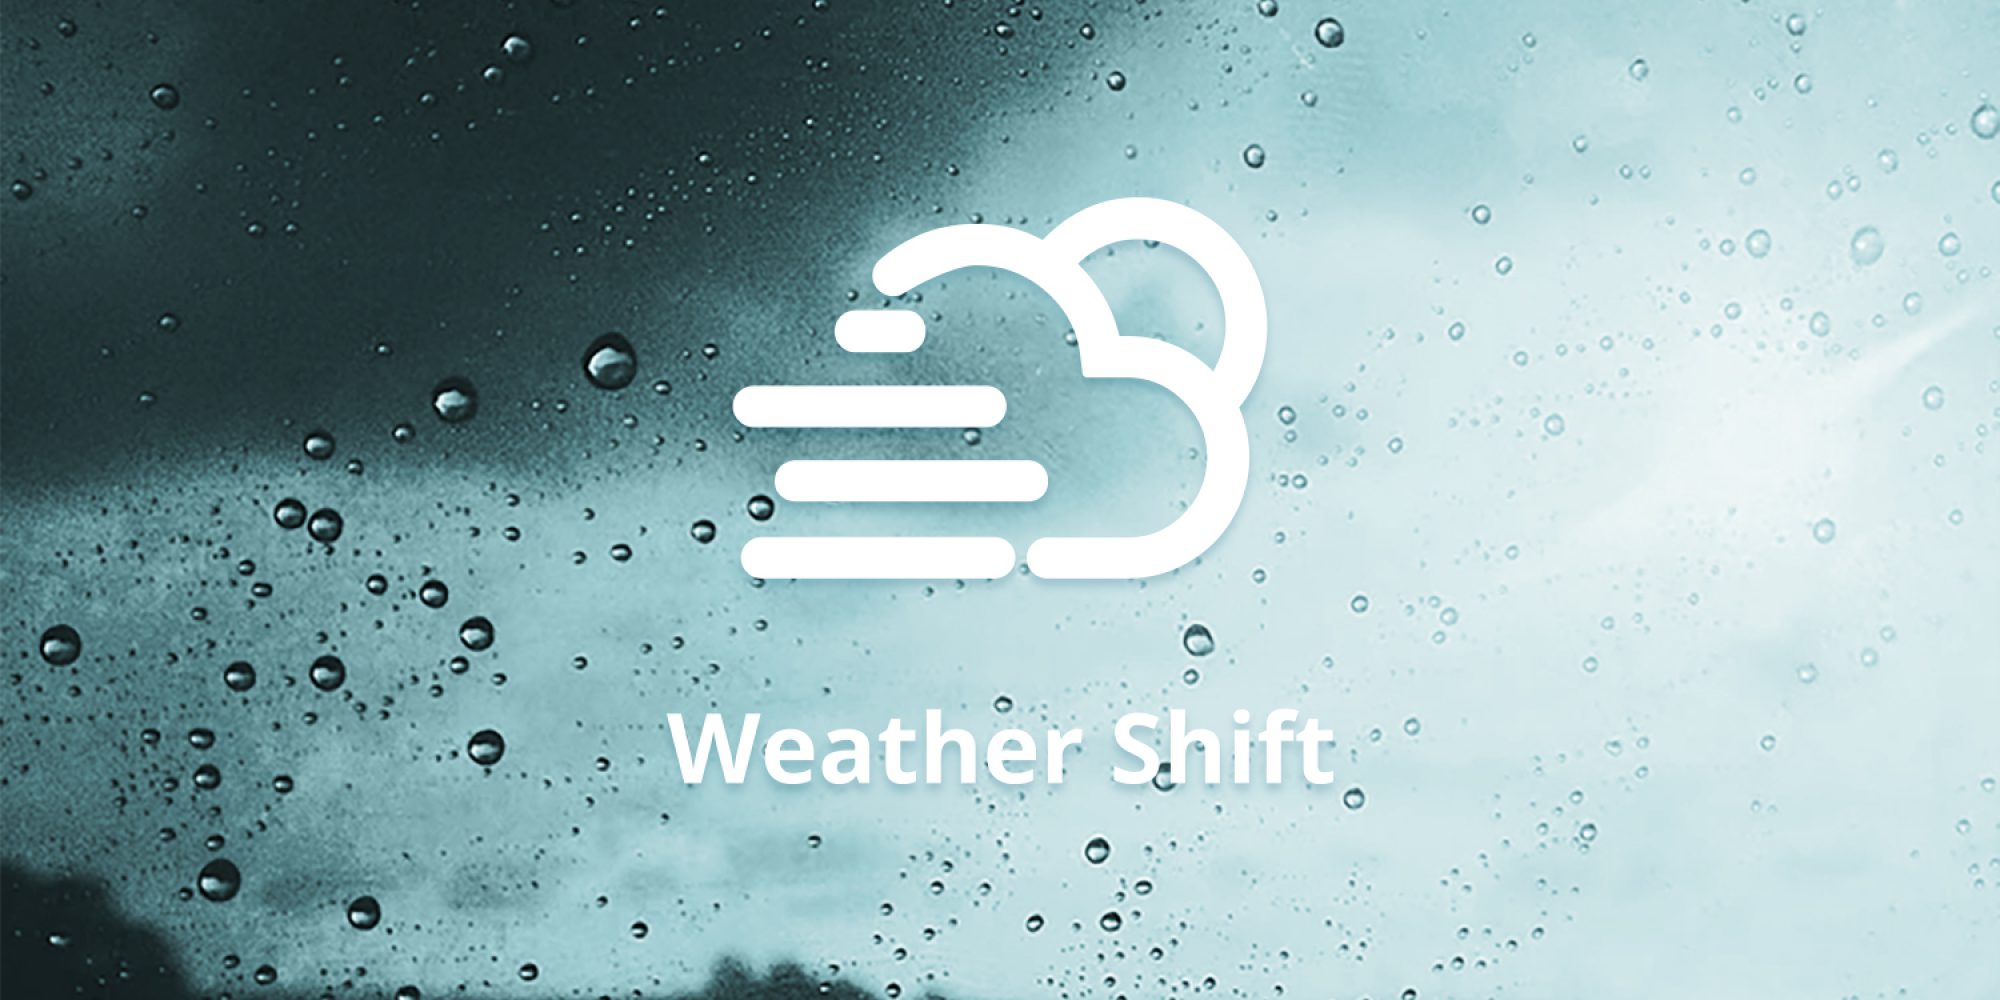 Weather Shift logo. Logo portraying the sun, a cloud and wind. The logo is on background of rain running down a window.